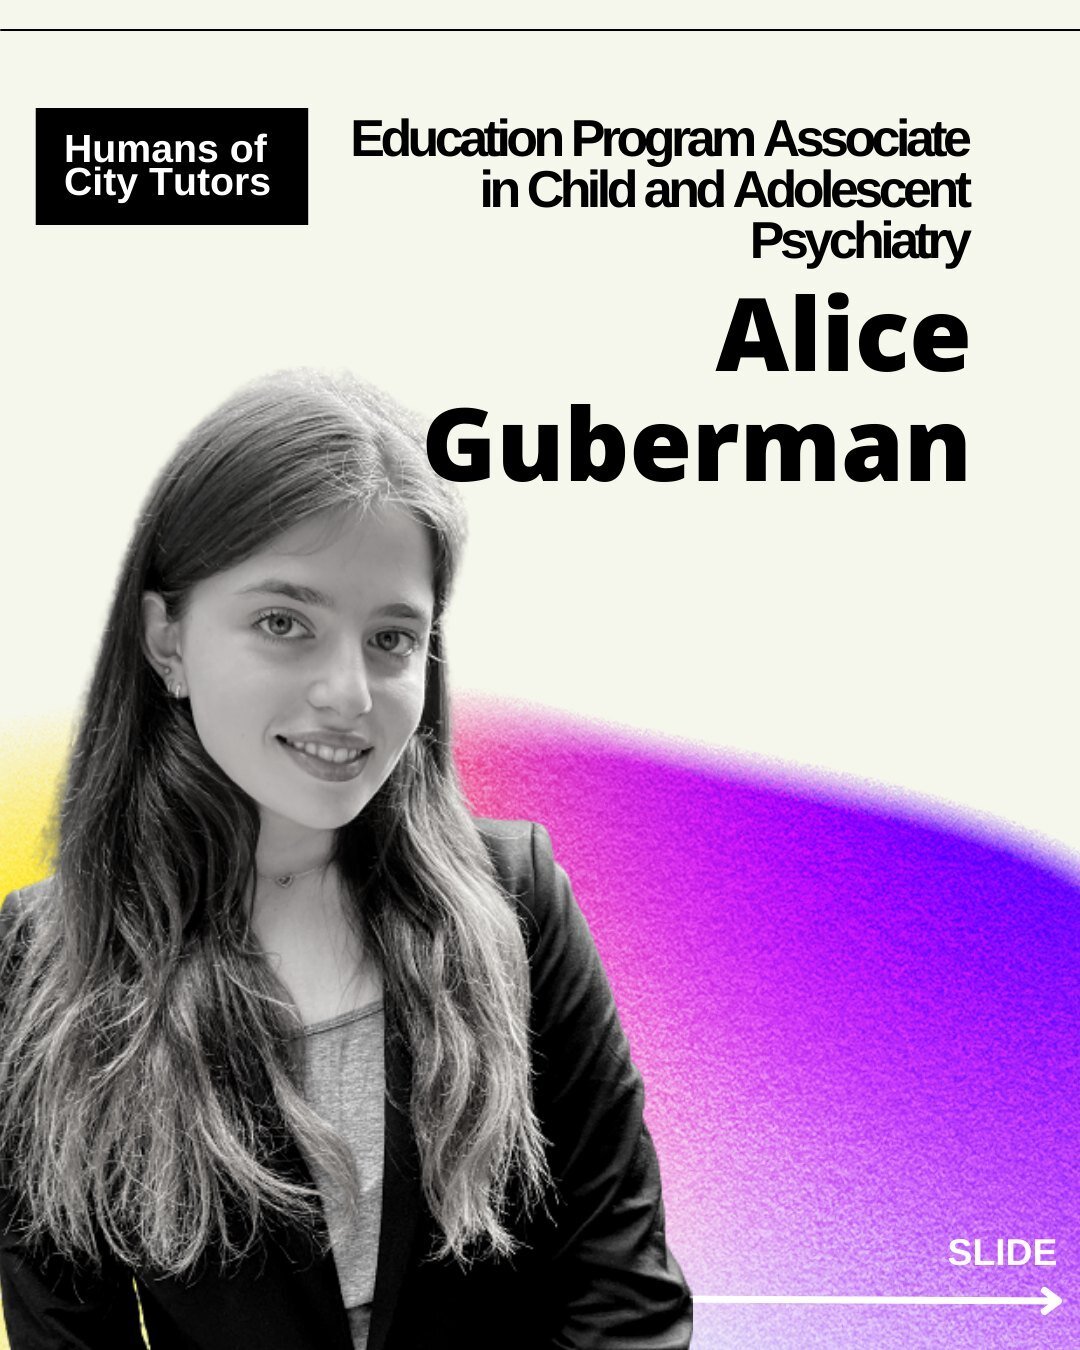 The City Tutors had the opportunity to speak with the Education Program Associate in Child and Adolescent Psychiatry Alice Guberman for this week's Humans of City Tutors.⁠
⁠
She shared with us her career path, and experience, and offered mentorship a